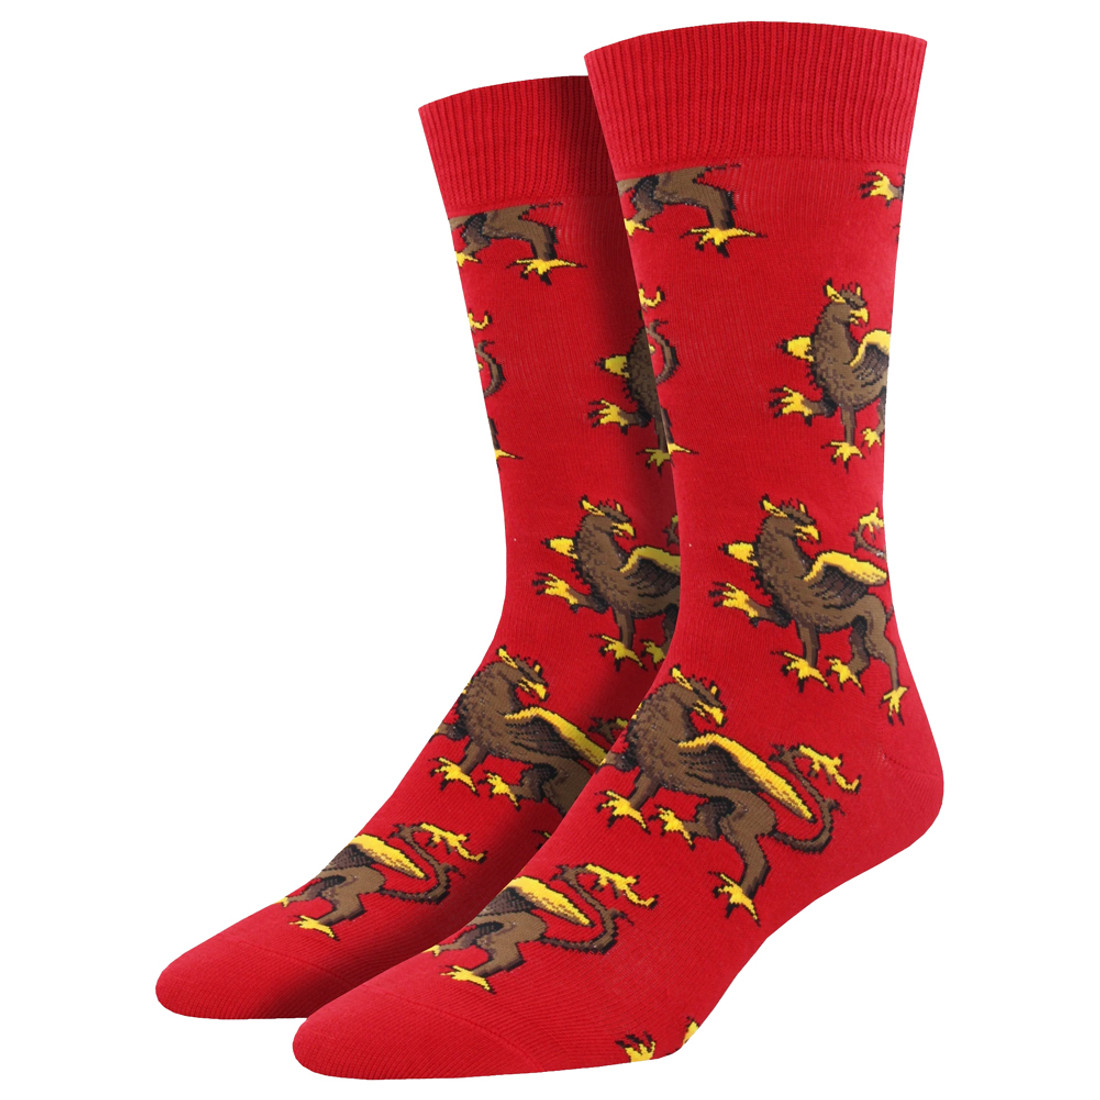 Griffin Mythical Creature Men's Crew Socks